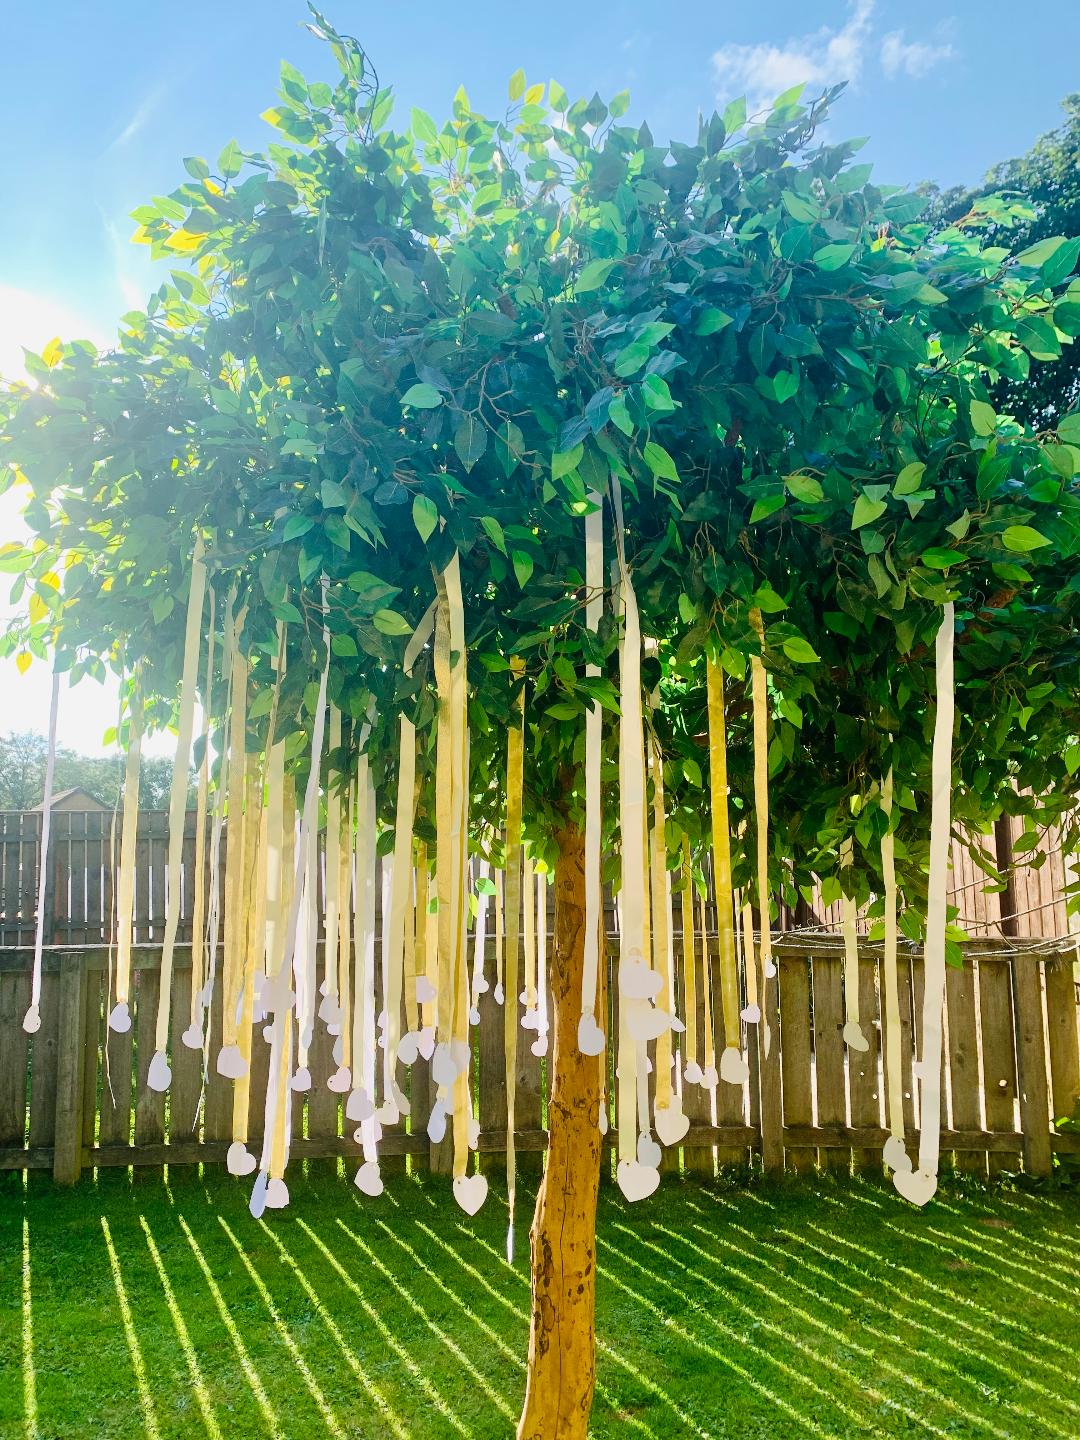 Giant wish tree with wish ribbons